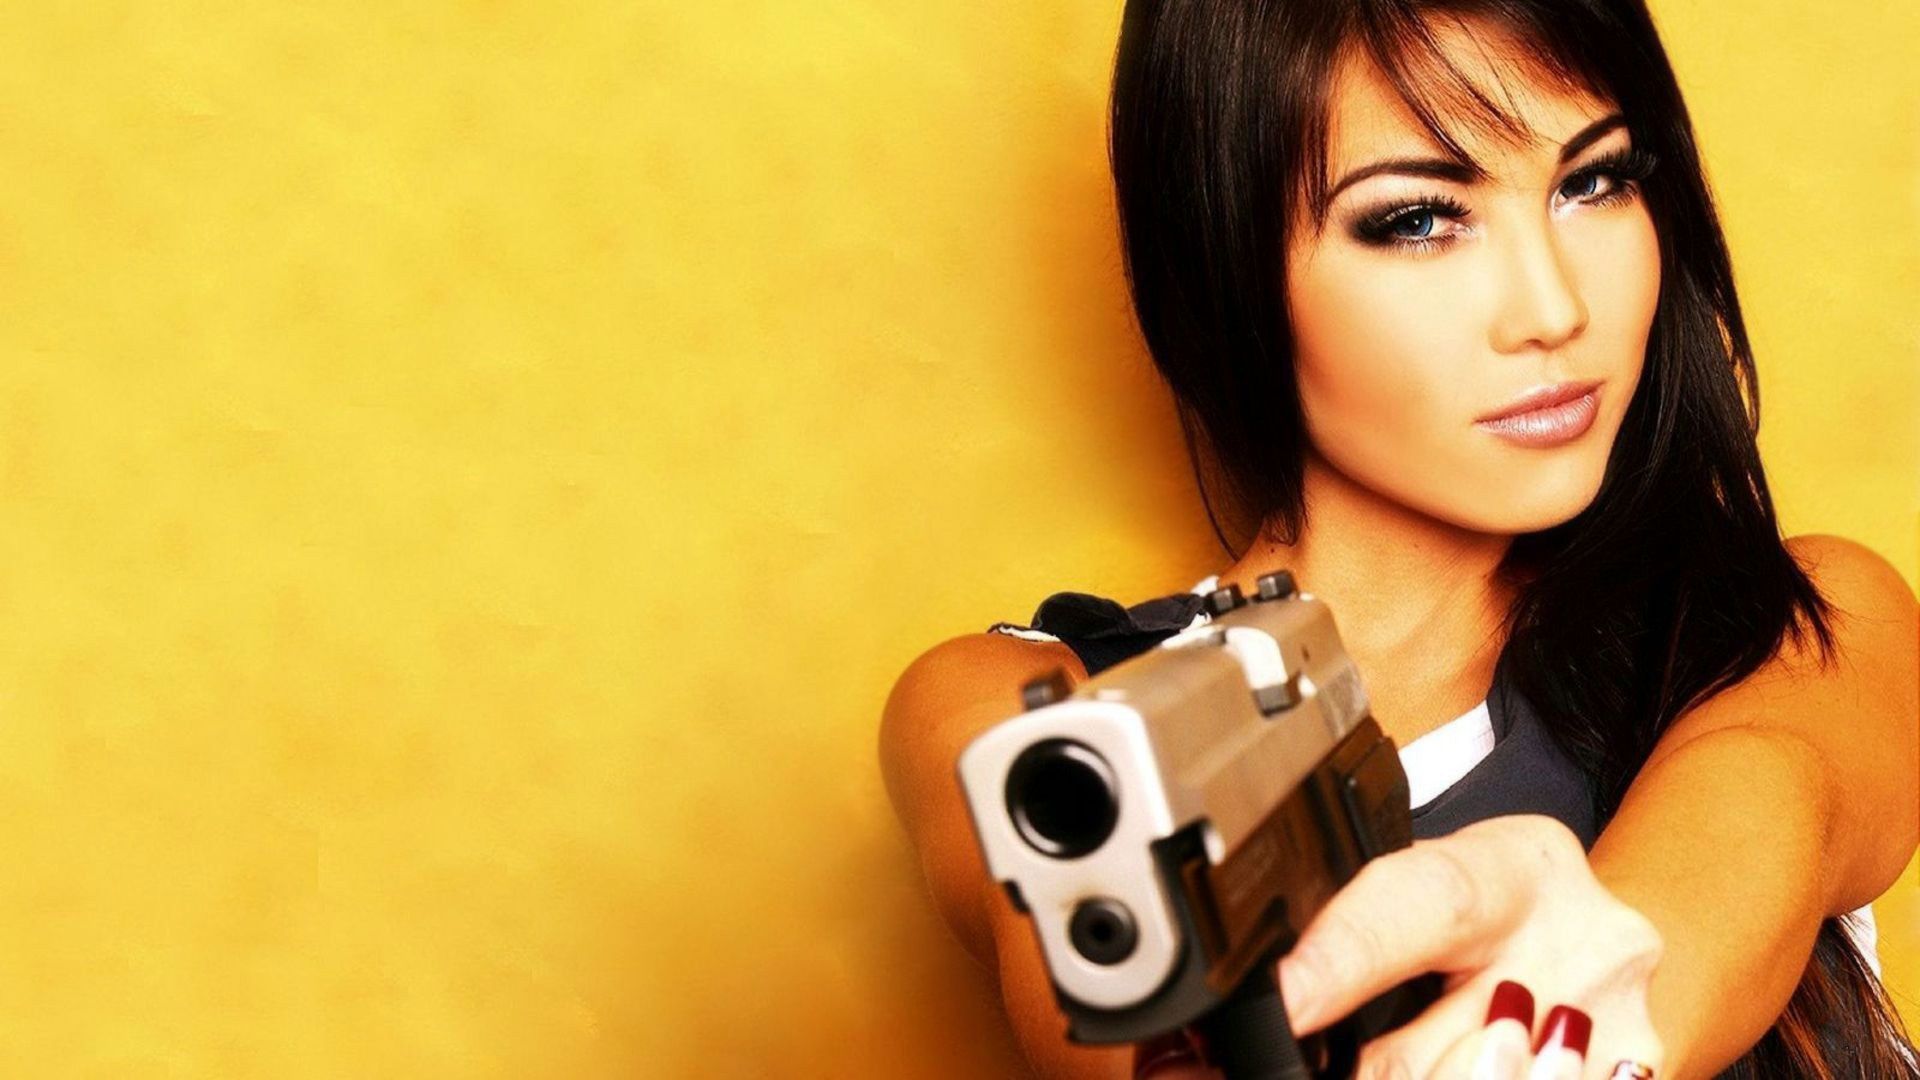 Chicks With Guns Wallpapers